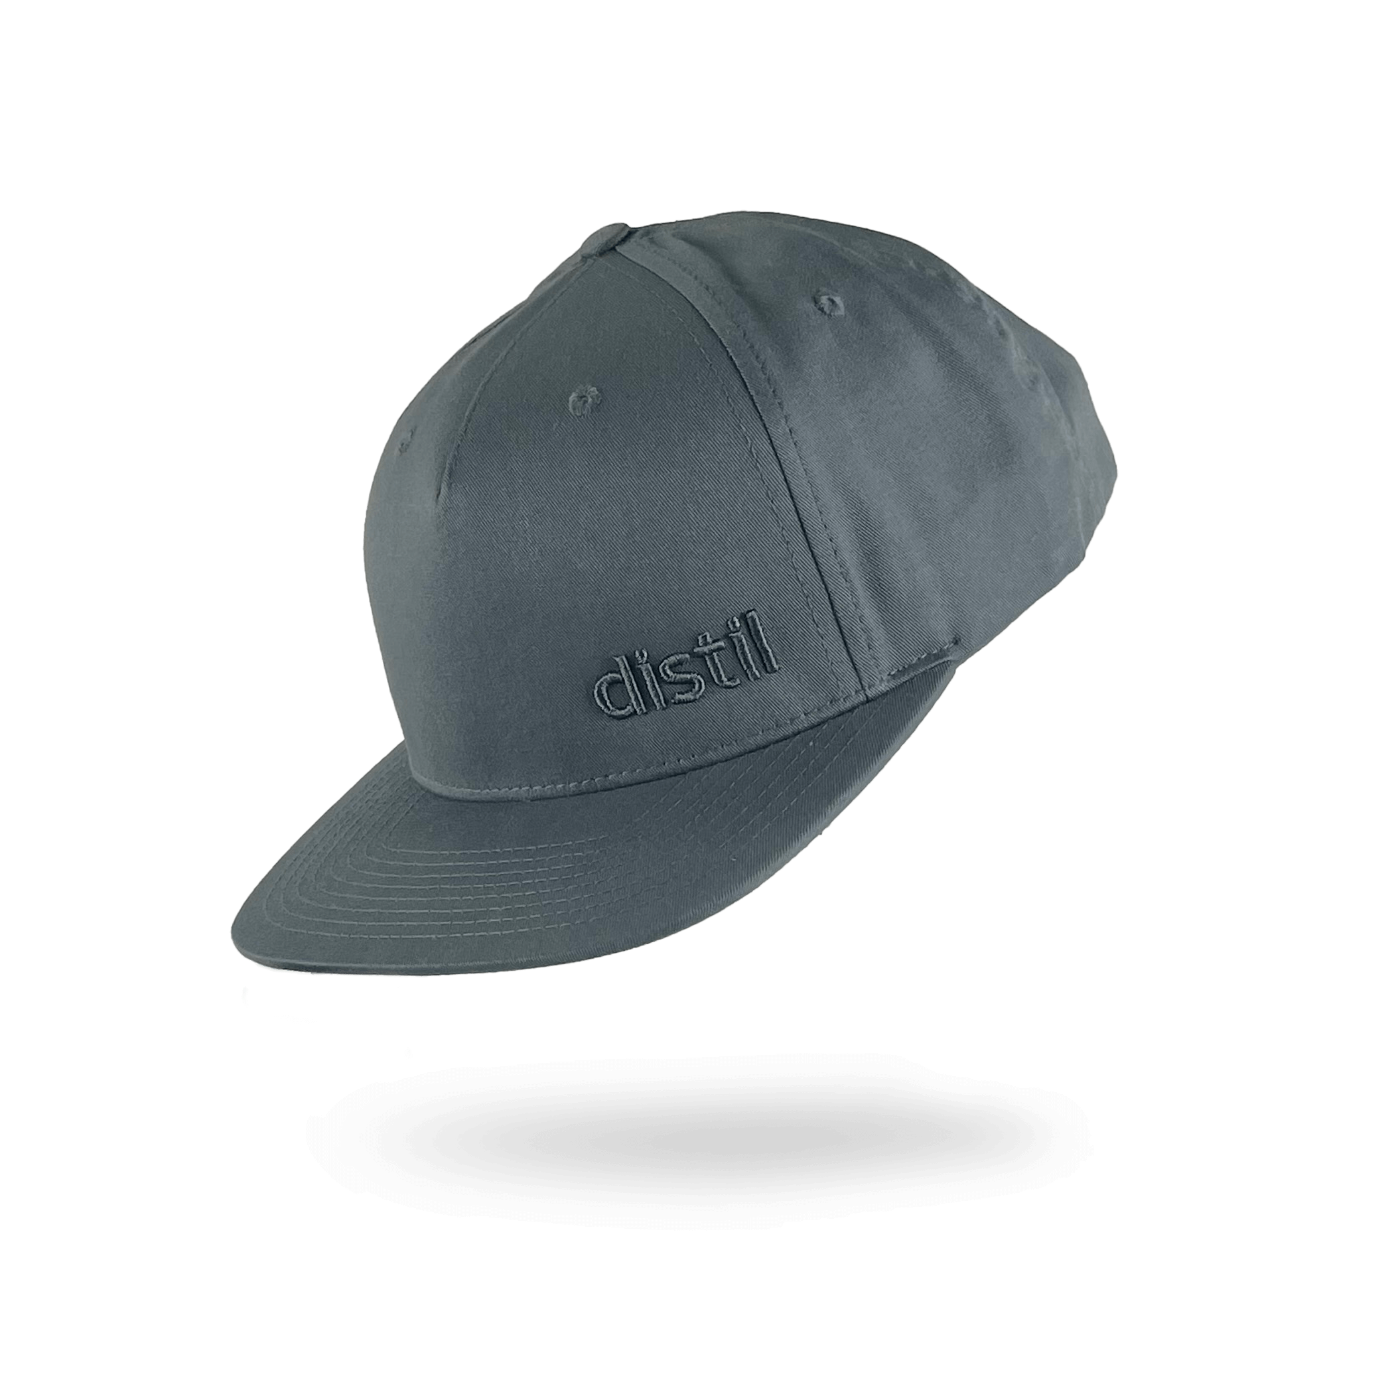 Distil embroidered hat in gray